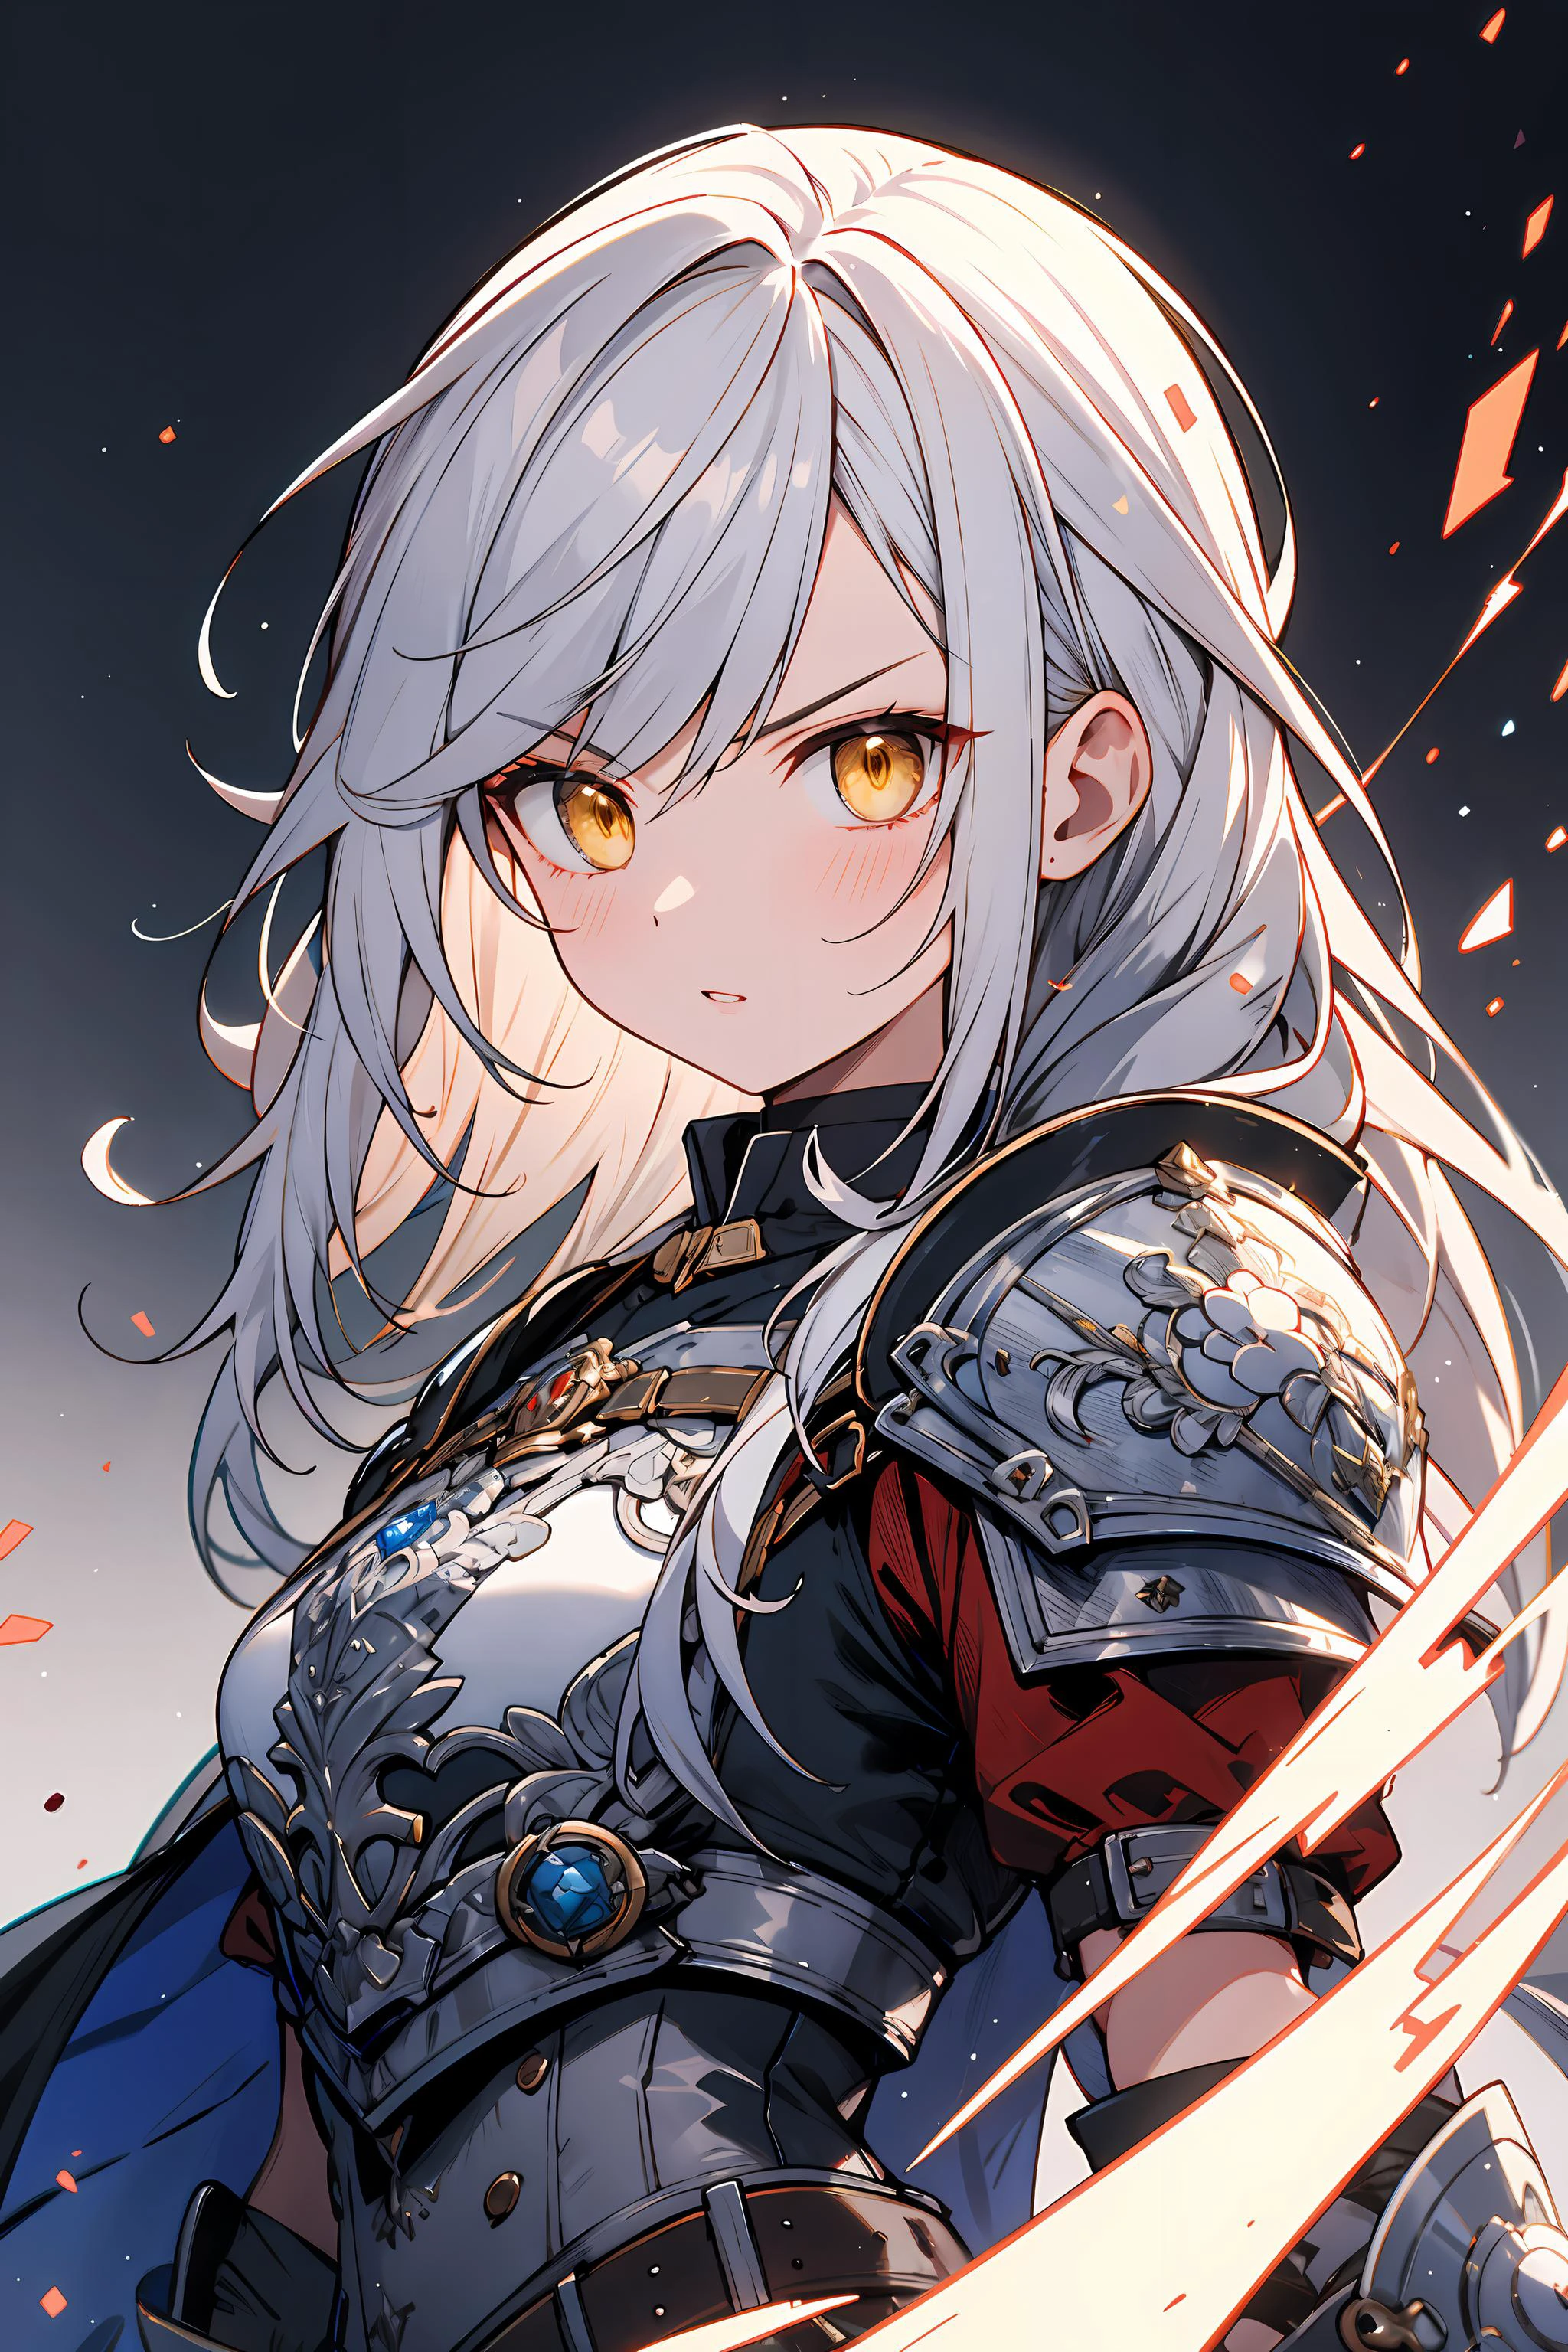 (masterpiece:1.2), best quality, high-res, HDR, perfect face, serious face, long silver hair, yellow eyes, mechanical white armor, intricate armor, delicate blue filigree, intricate filigree, red metalic parts, detailed part, medieval background landscape, dynamic lights,